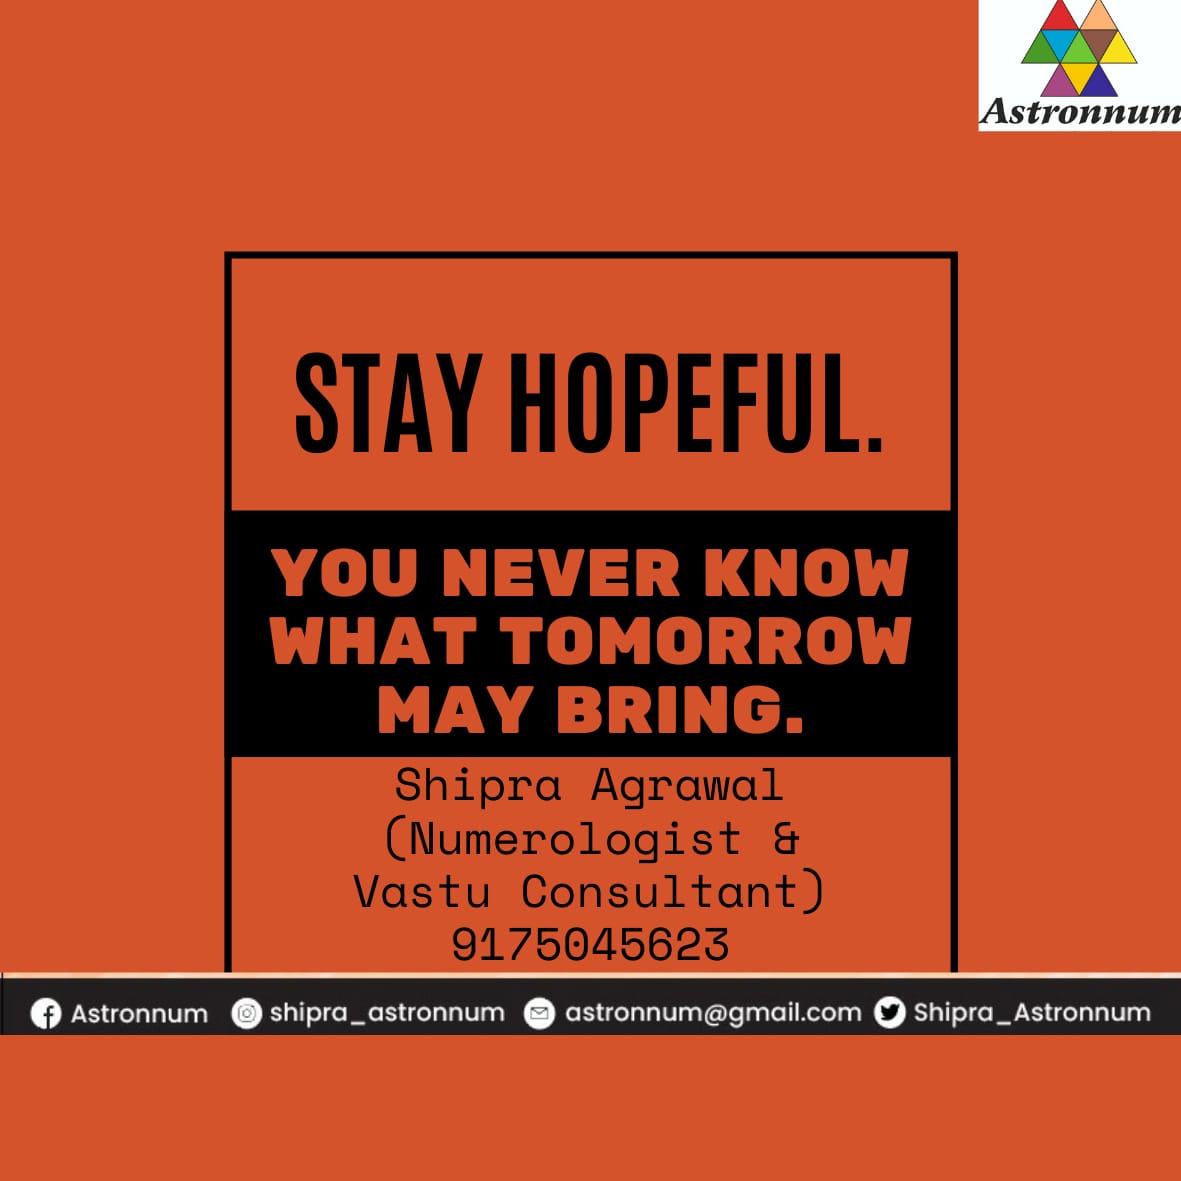 Continue doing your duties with a positive mindset and the right changes will take place at the right time. For any kind of Numerology Assistance or Vastu Consultancy, do connect with me... #astronnum #shipraagrawal #numerologist #vastuconsultant #numerology #numerologymeaning